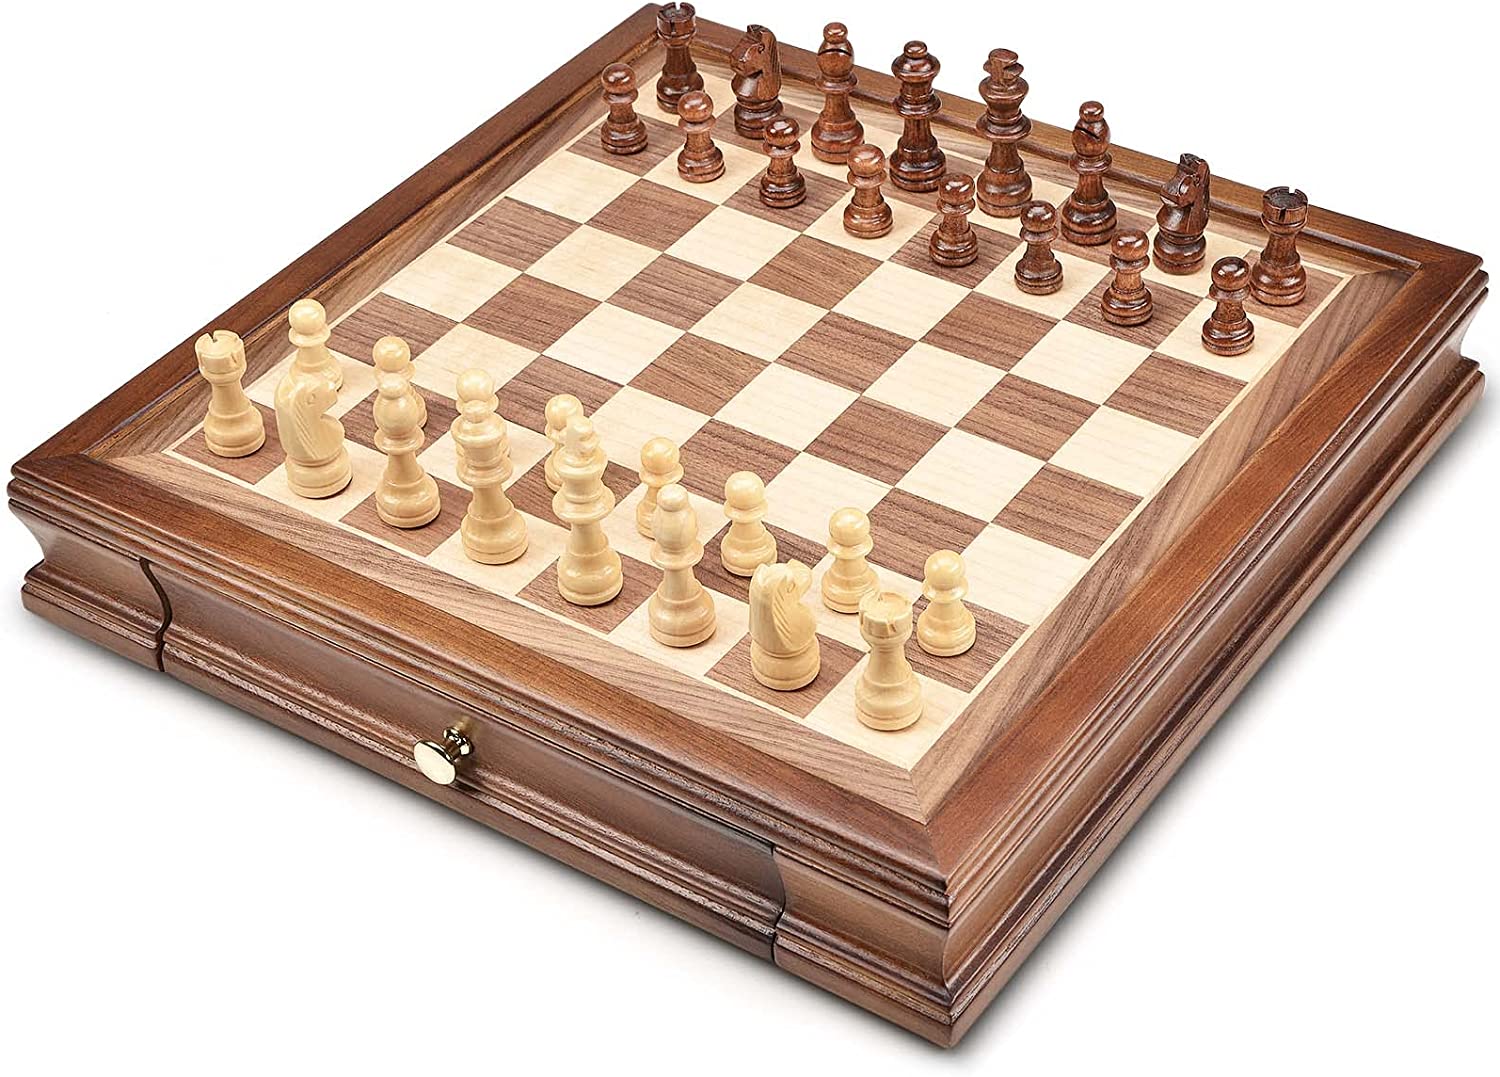 12.8" x 12.8" Magnetic Wooden Chess Set with 2 Built-in Storage Drawers - 2 Bonus Extra Queens - Gift Packaging - Staunton Chess Pieces, Board Games Chess Sets for Adults and Kids